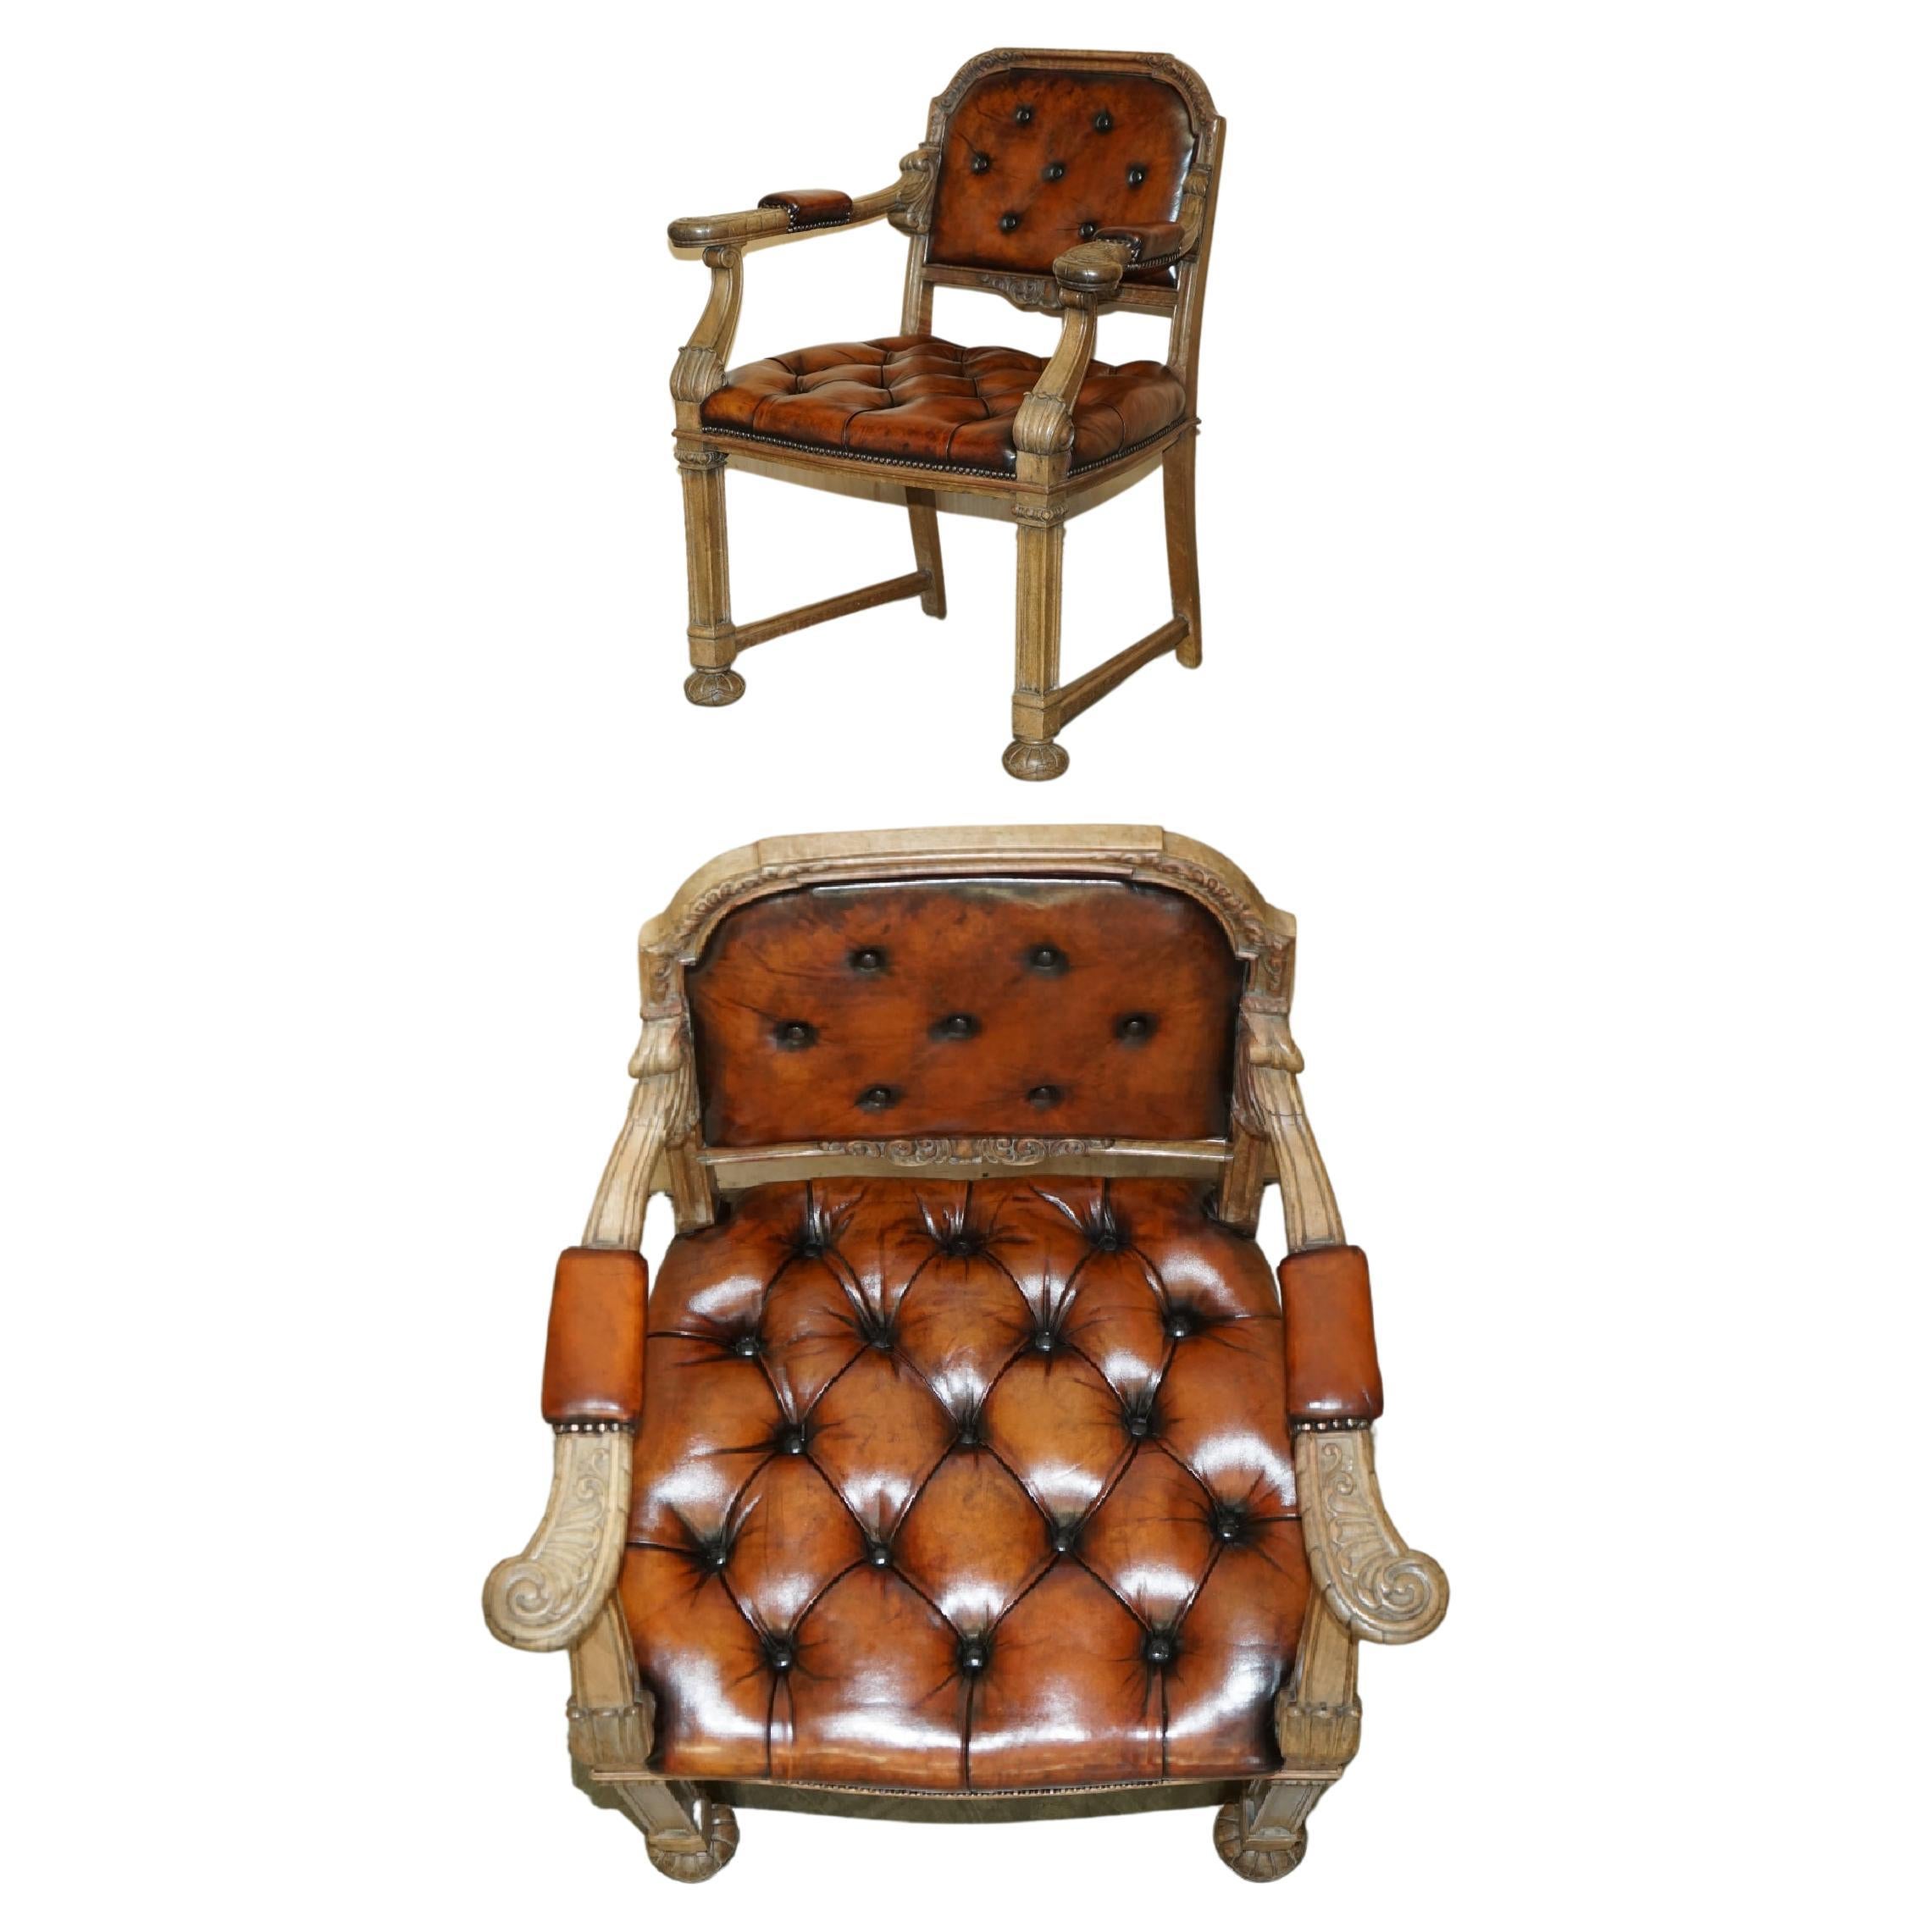 VERY FiNE RESTORED ANTIQUE CHESTERFIELD WILLIAM IV OAK BROWN LEATHER DESK CHAIr For Sale